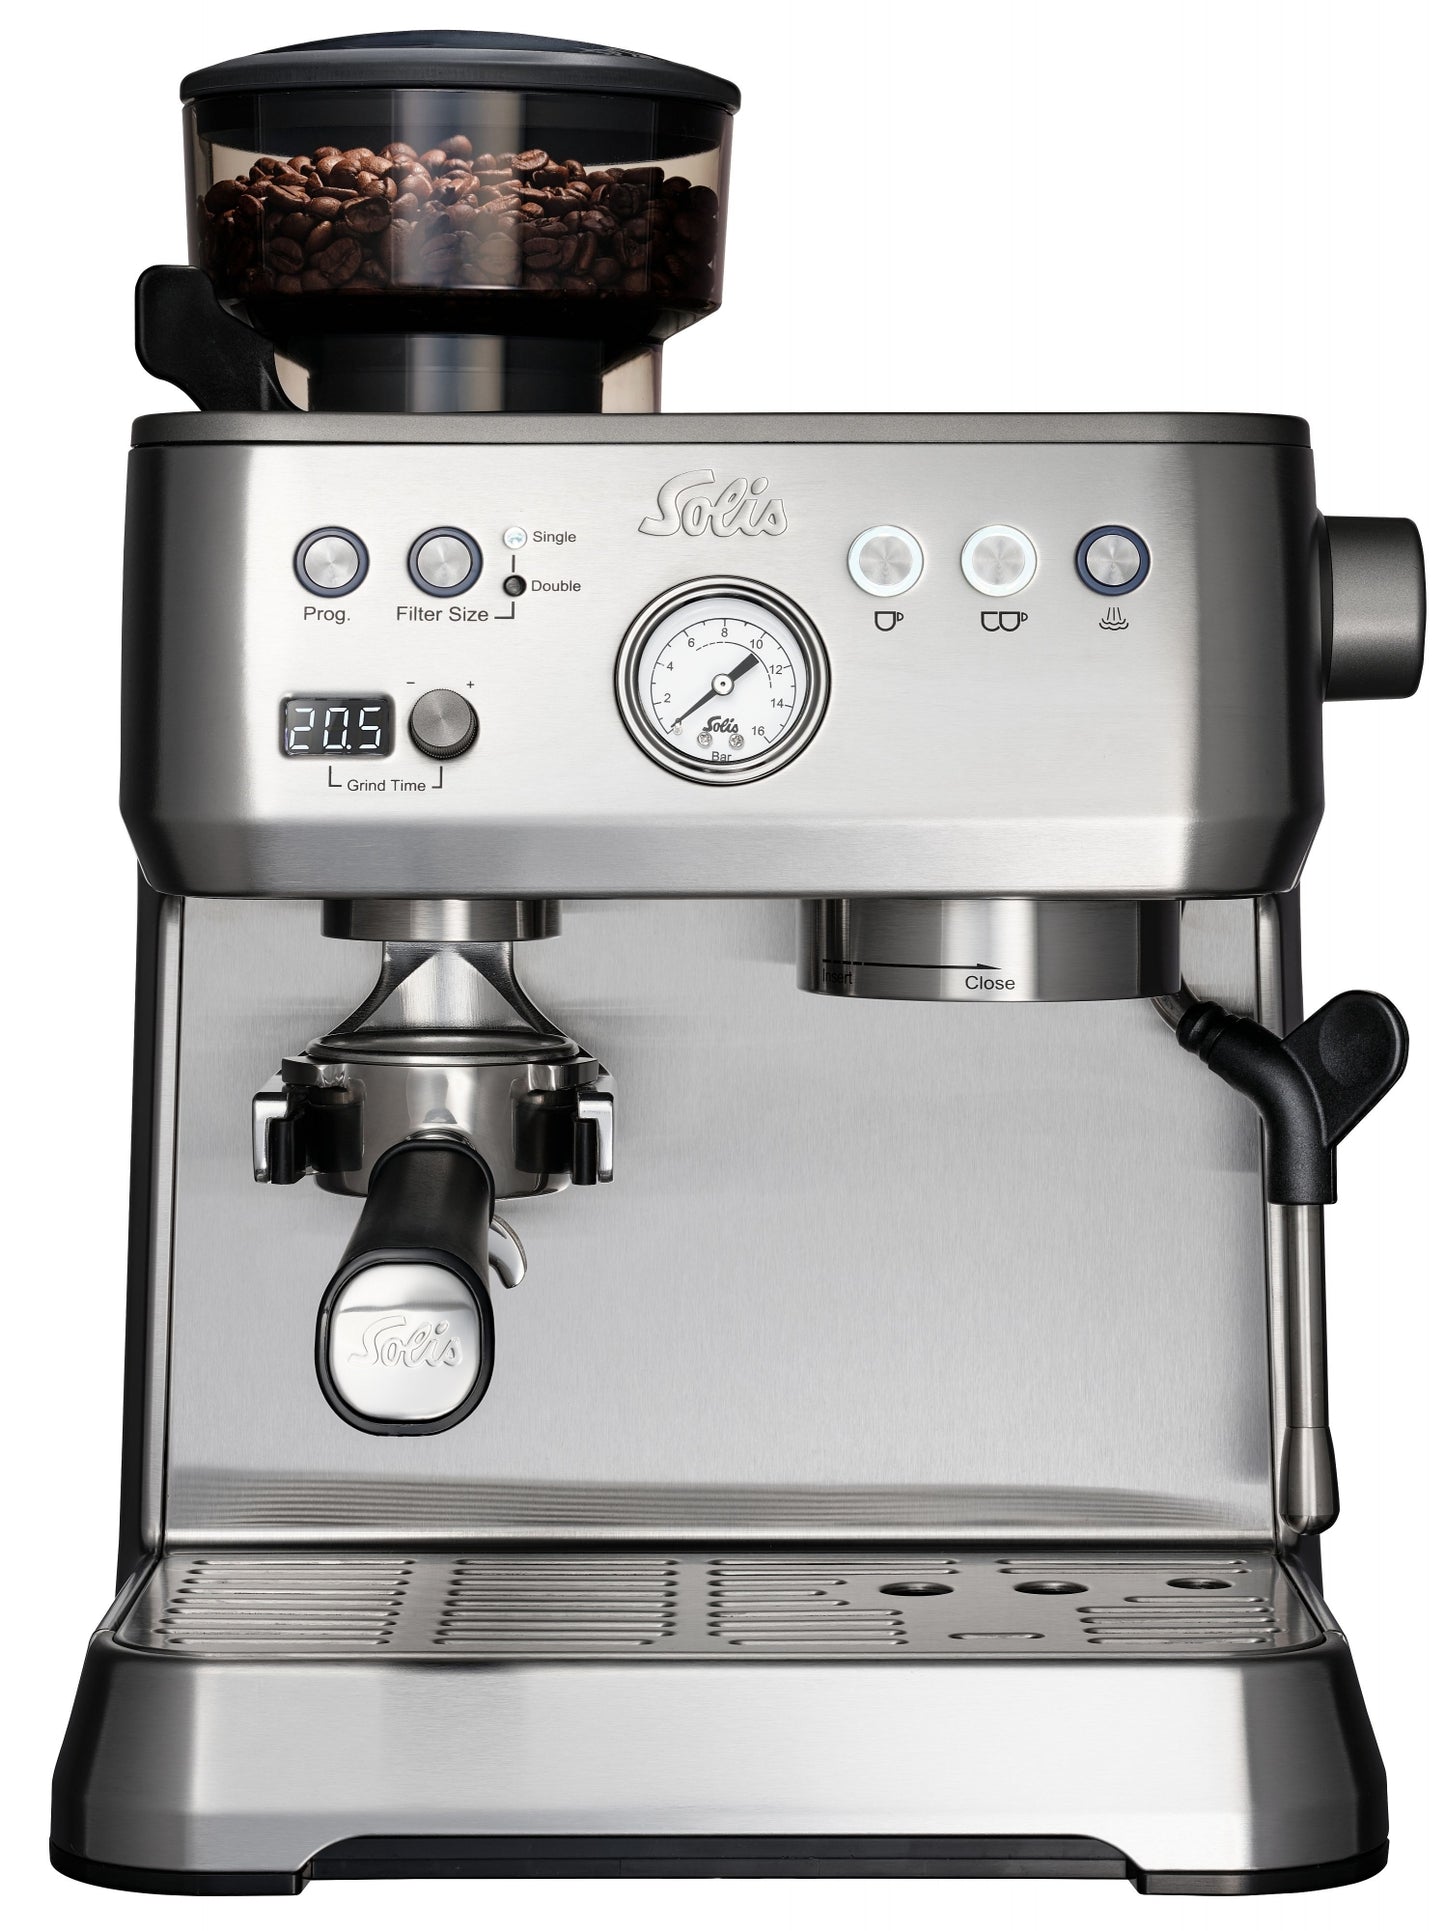 Grind&amp;Infuse PERFETTA (Type 1019) B-Ware